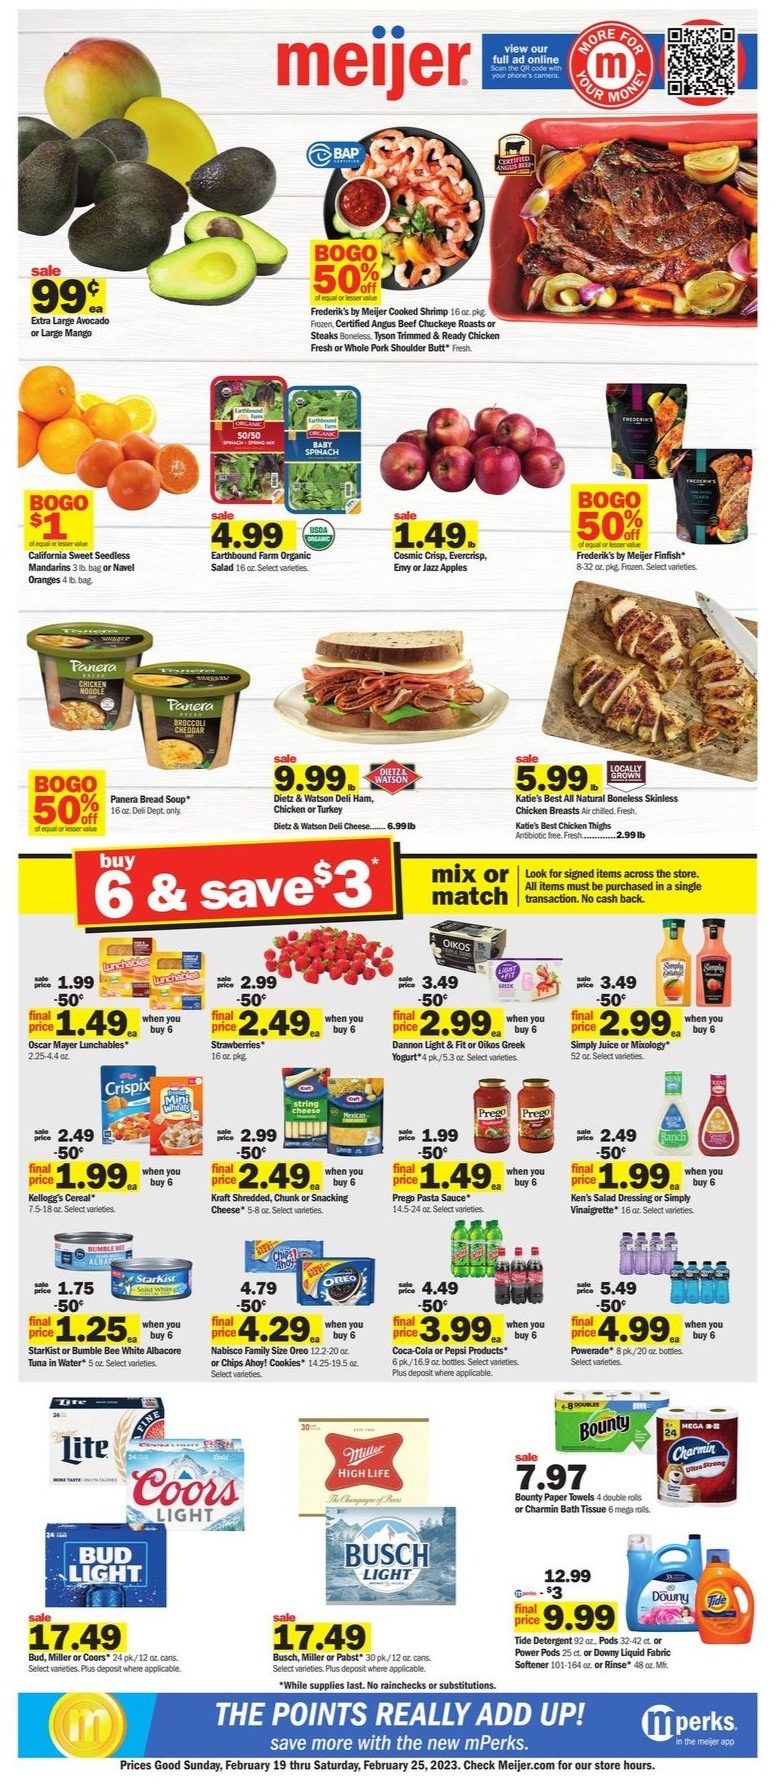 Meijer Weekly Ad 26th Feb 2023 – 4th Mar 2023 Page 1